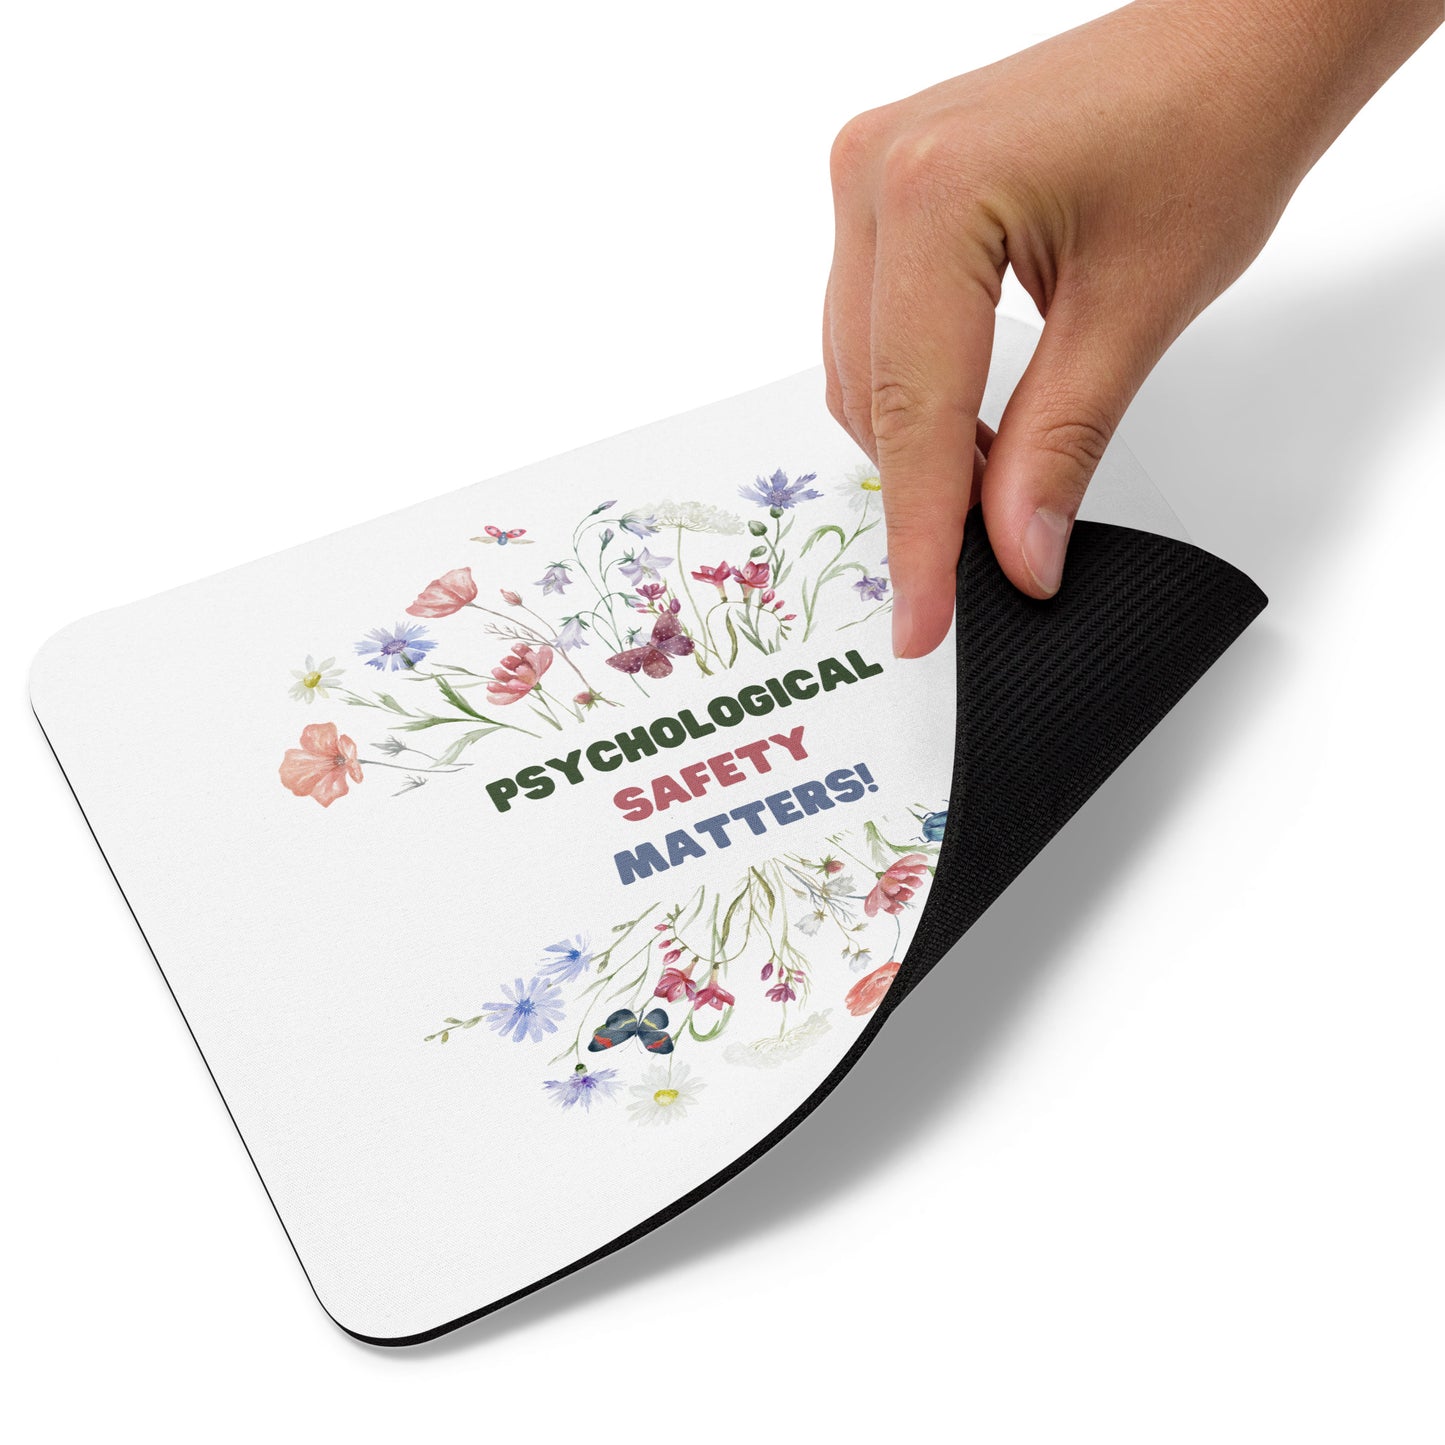 Psychological Safety Matters Mouse pad